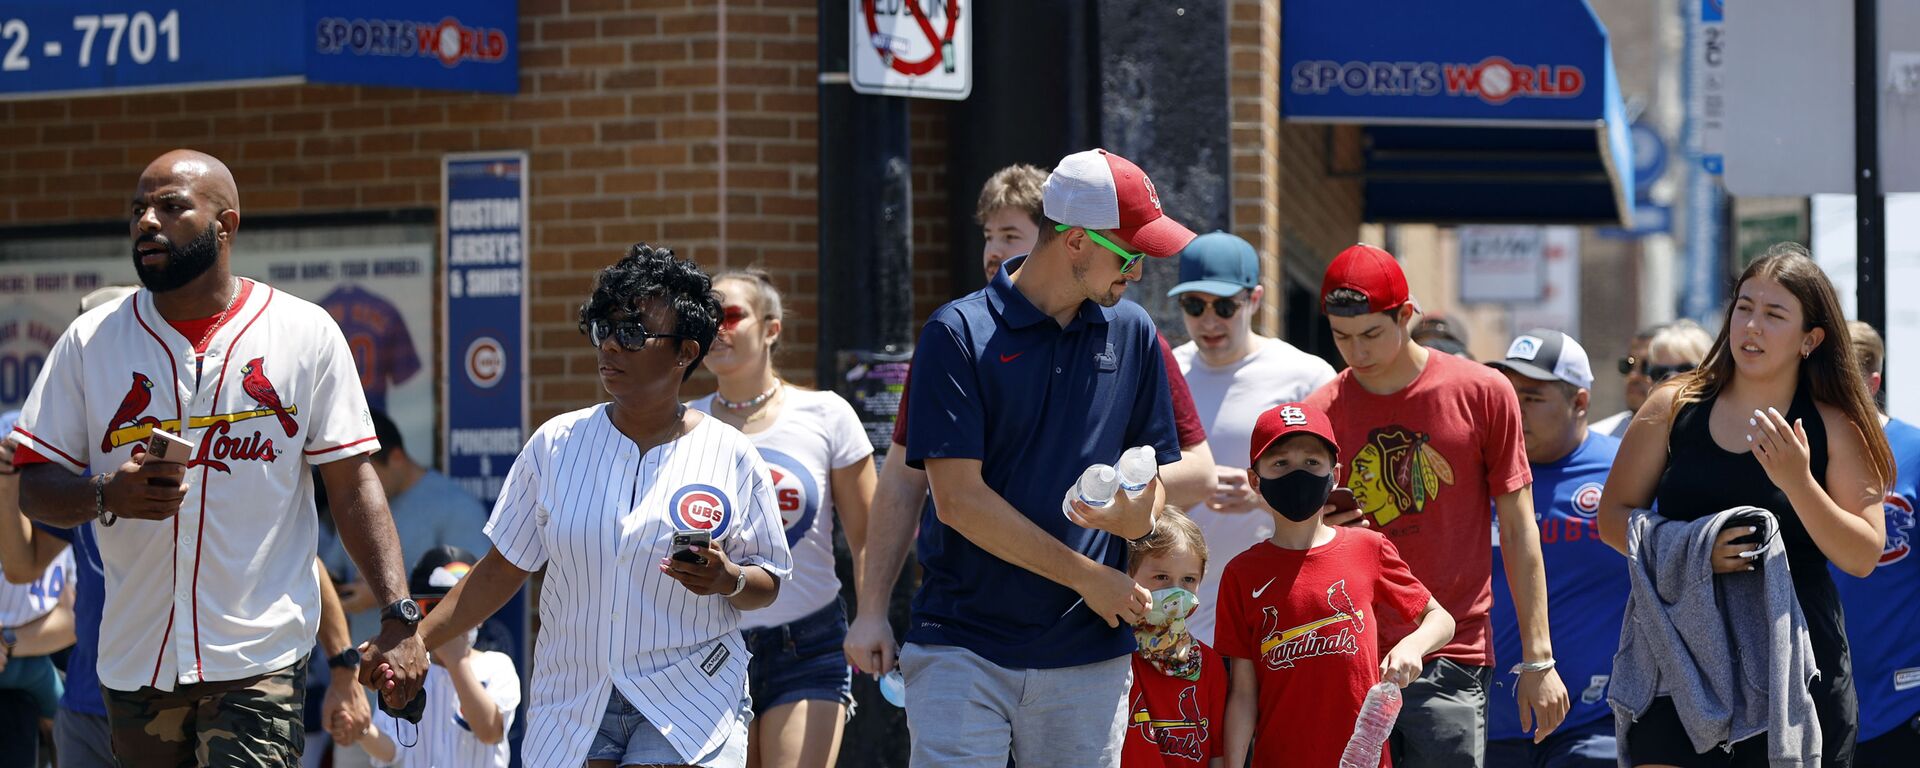 FILE - In this June 11, 2021, file photo, people cross a street as they make their way toward Chicago's Wrigley Field for a baseball game. COVID-19 deaths in the U.S. have dipped below 300 a day for the first time since the early days of the disaster in March 2020, while the number of Americans fully vaccinated has reached about 150 million - Sputnik International, 1920, 19.10.2022